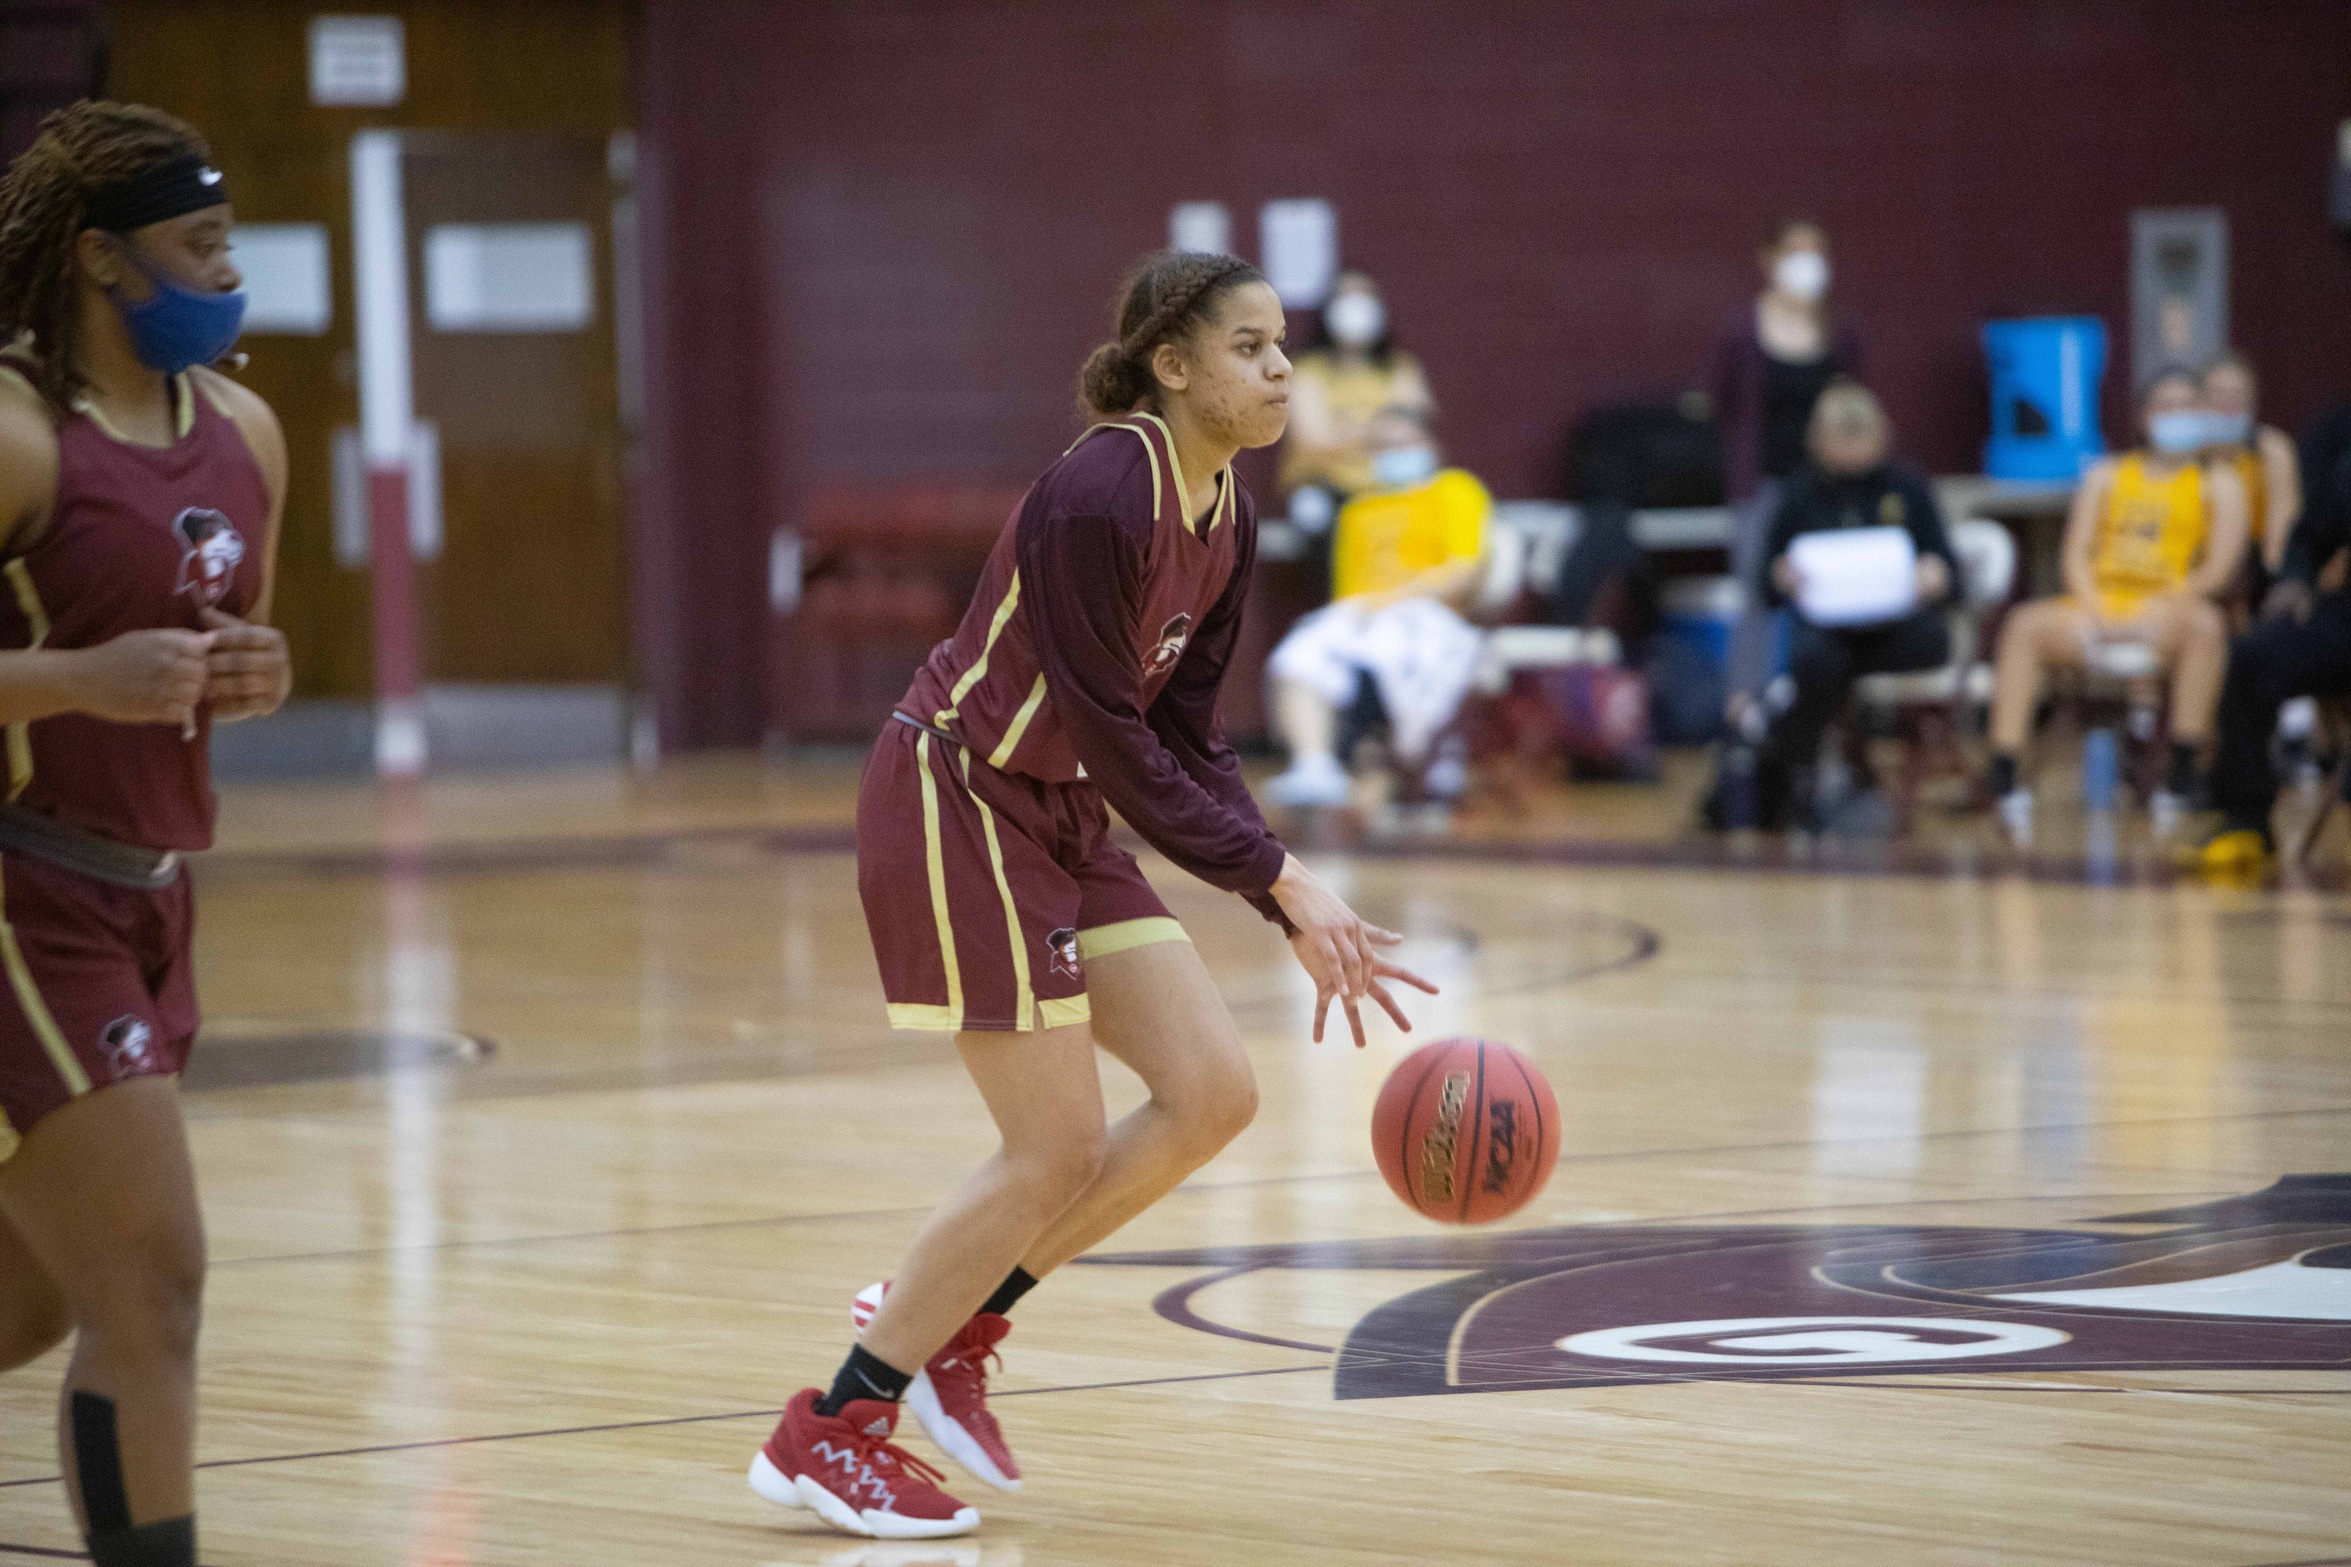 Ladies Fall 70-63 at Dallas in SCAC Contest on Friday